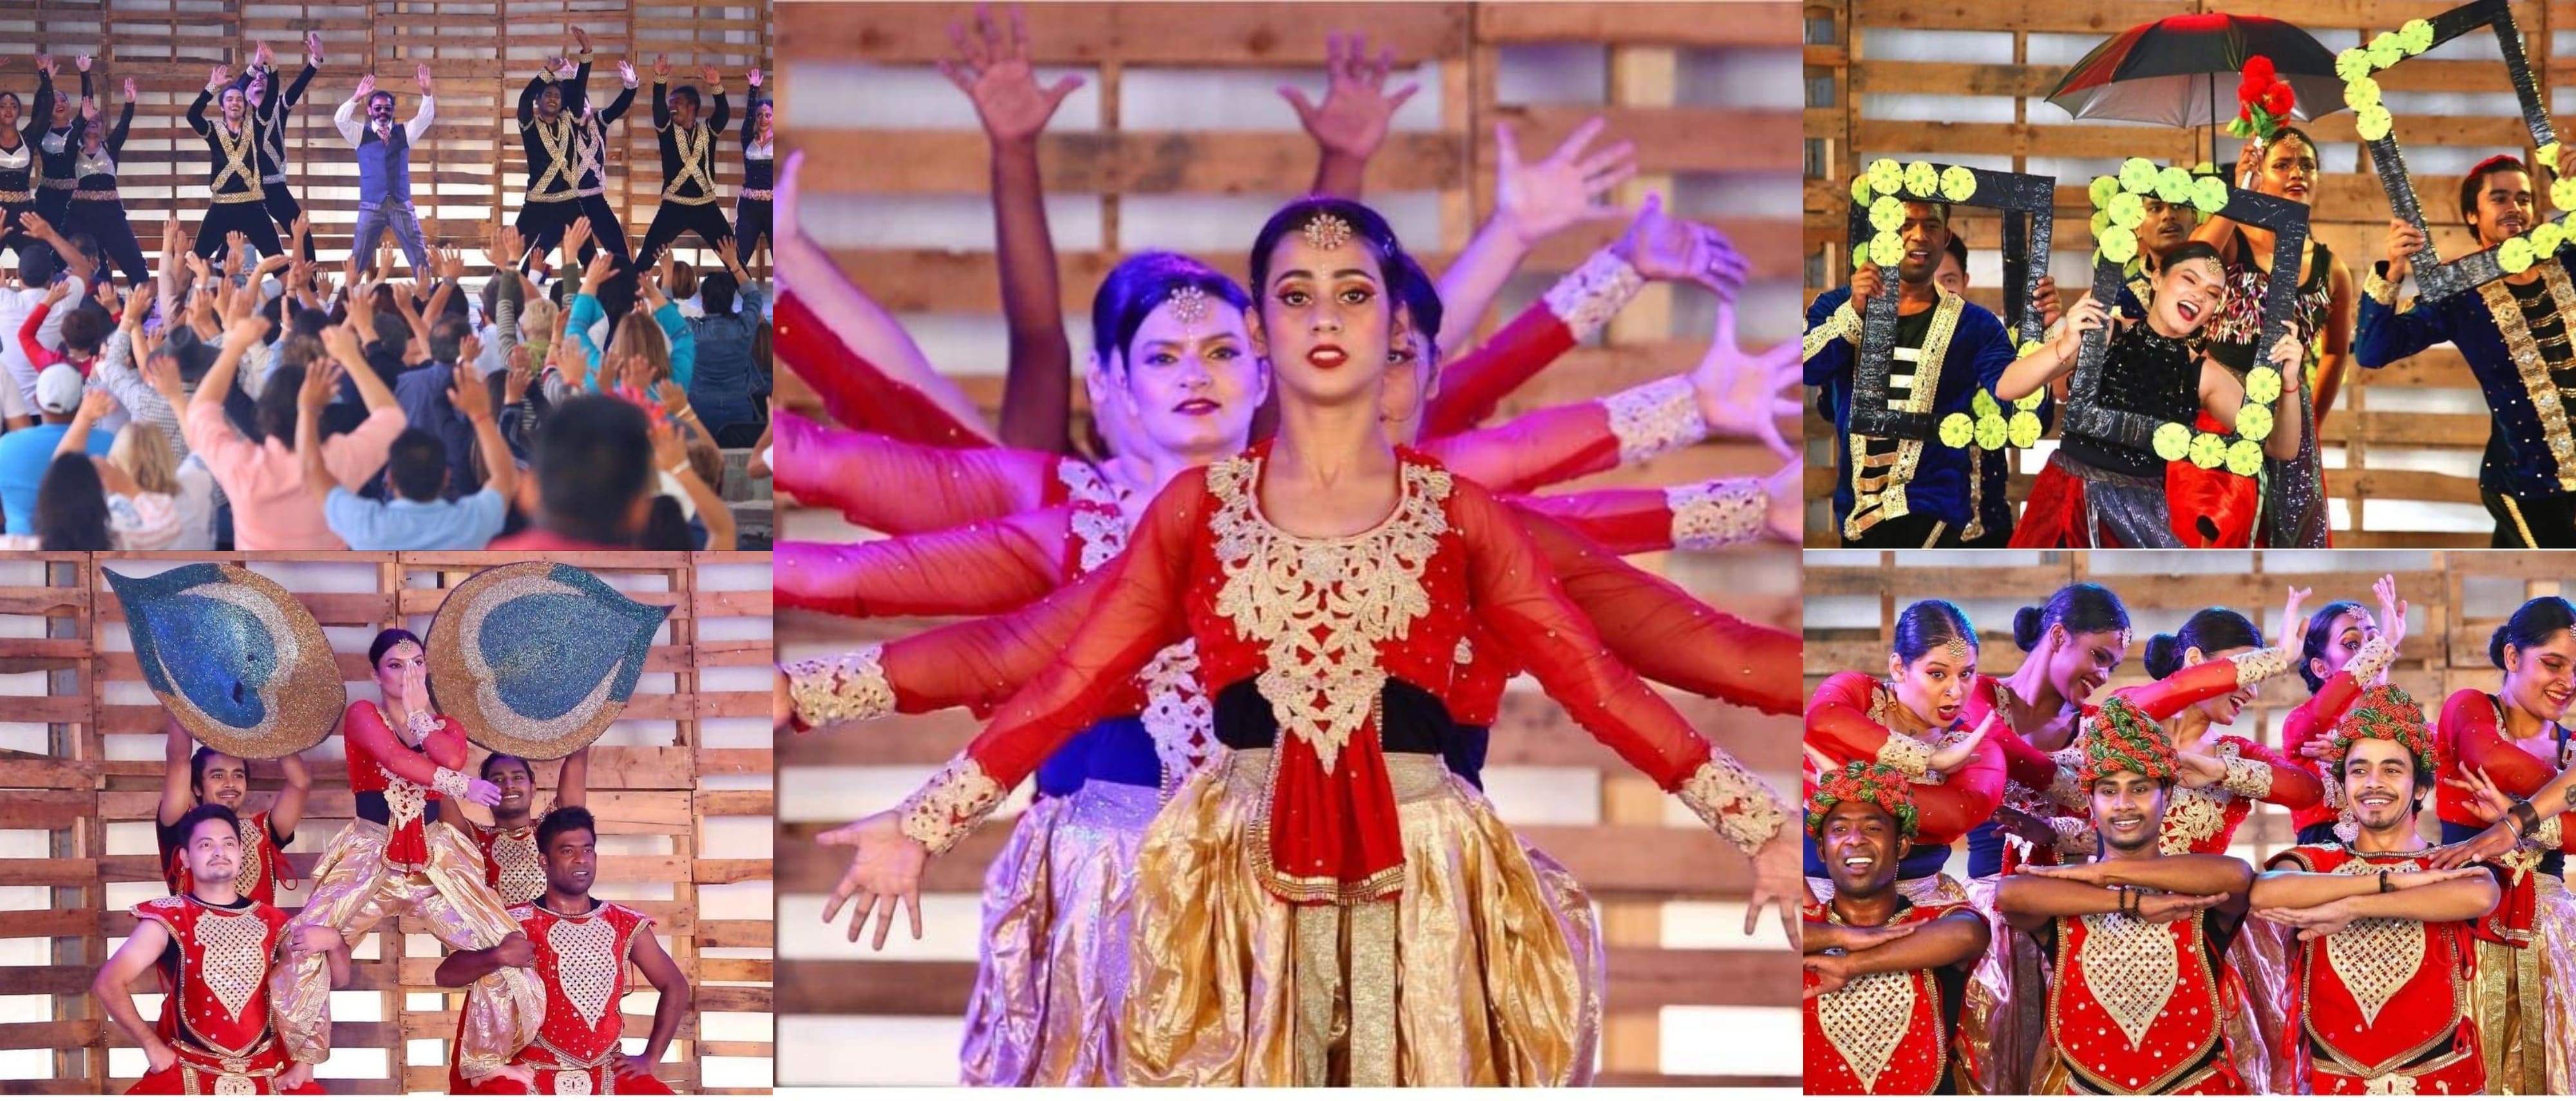  Bollywood dance group 'Taka Dimi Ta'  from India gave mesmerizing performances portraying the different  flavors of bollywood, its evolution over the years and rich cultural heritage of India at the 49th International Cervantino Festival in Mexico. Some glimpses from the event in Guanajuato.